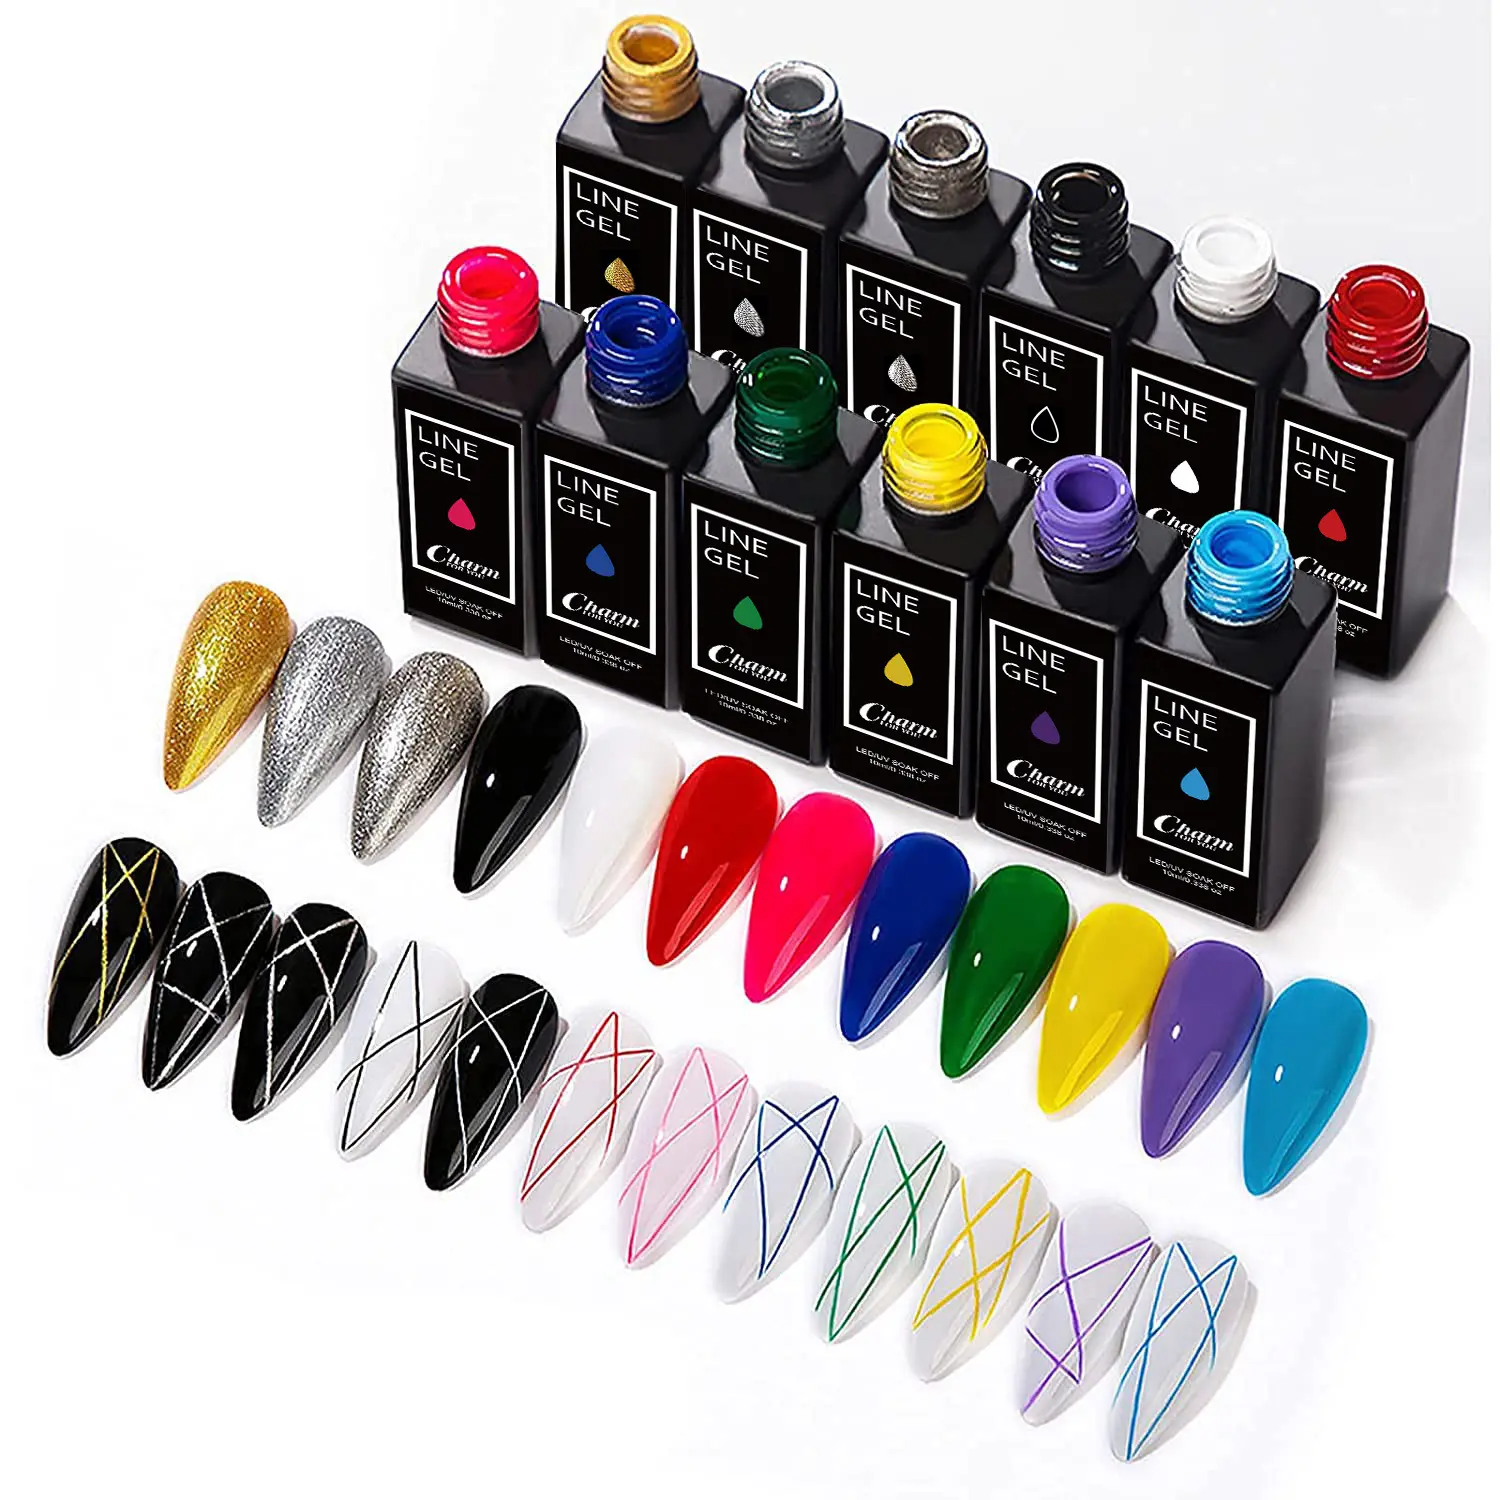 Oem Private Label 12 couleurs 10ml Uv Neon Painting Spider Line Vernis à ongles Outils de manucure Gel Liner Nail Art